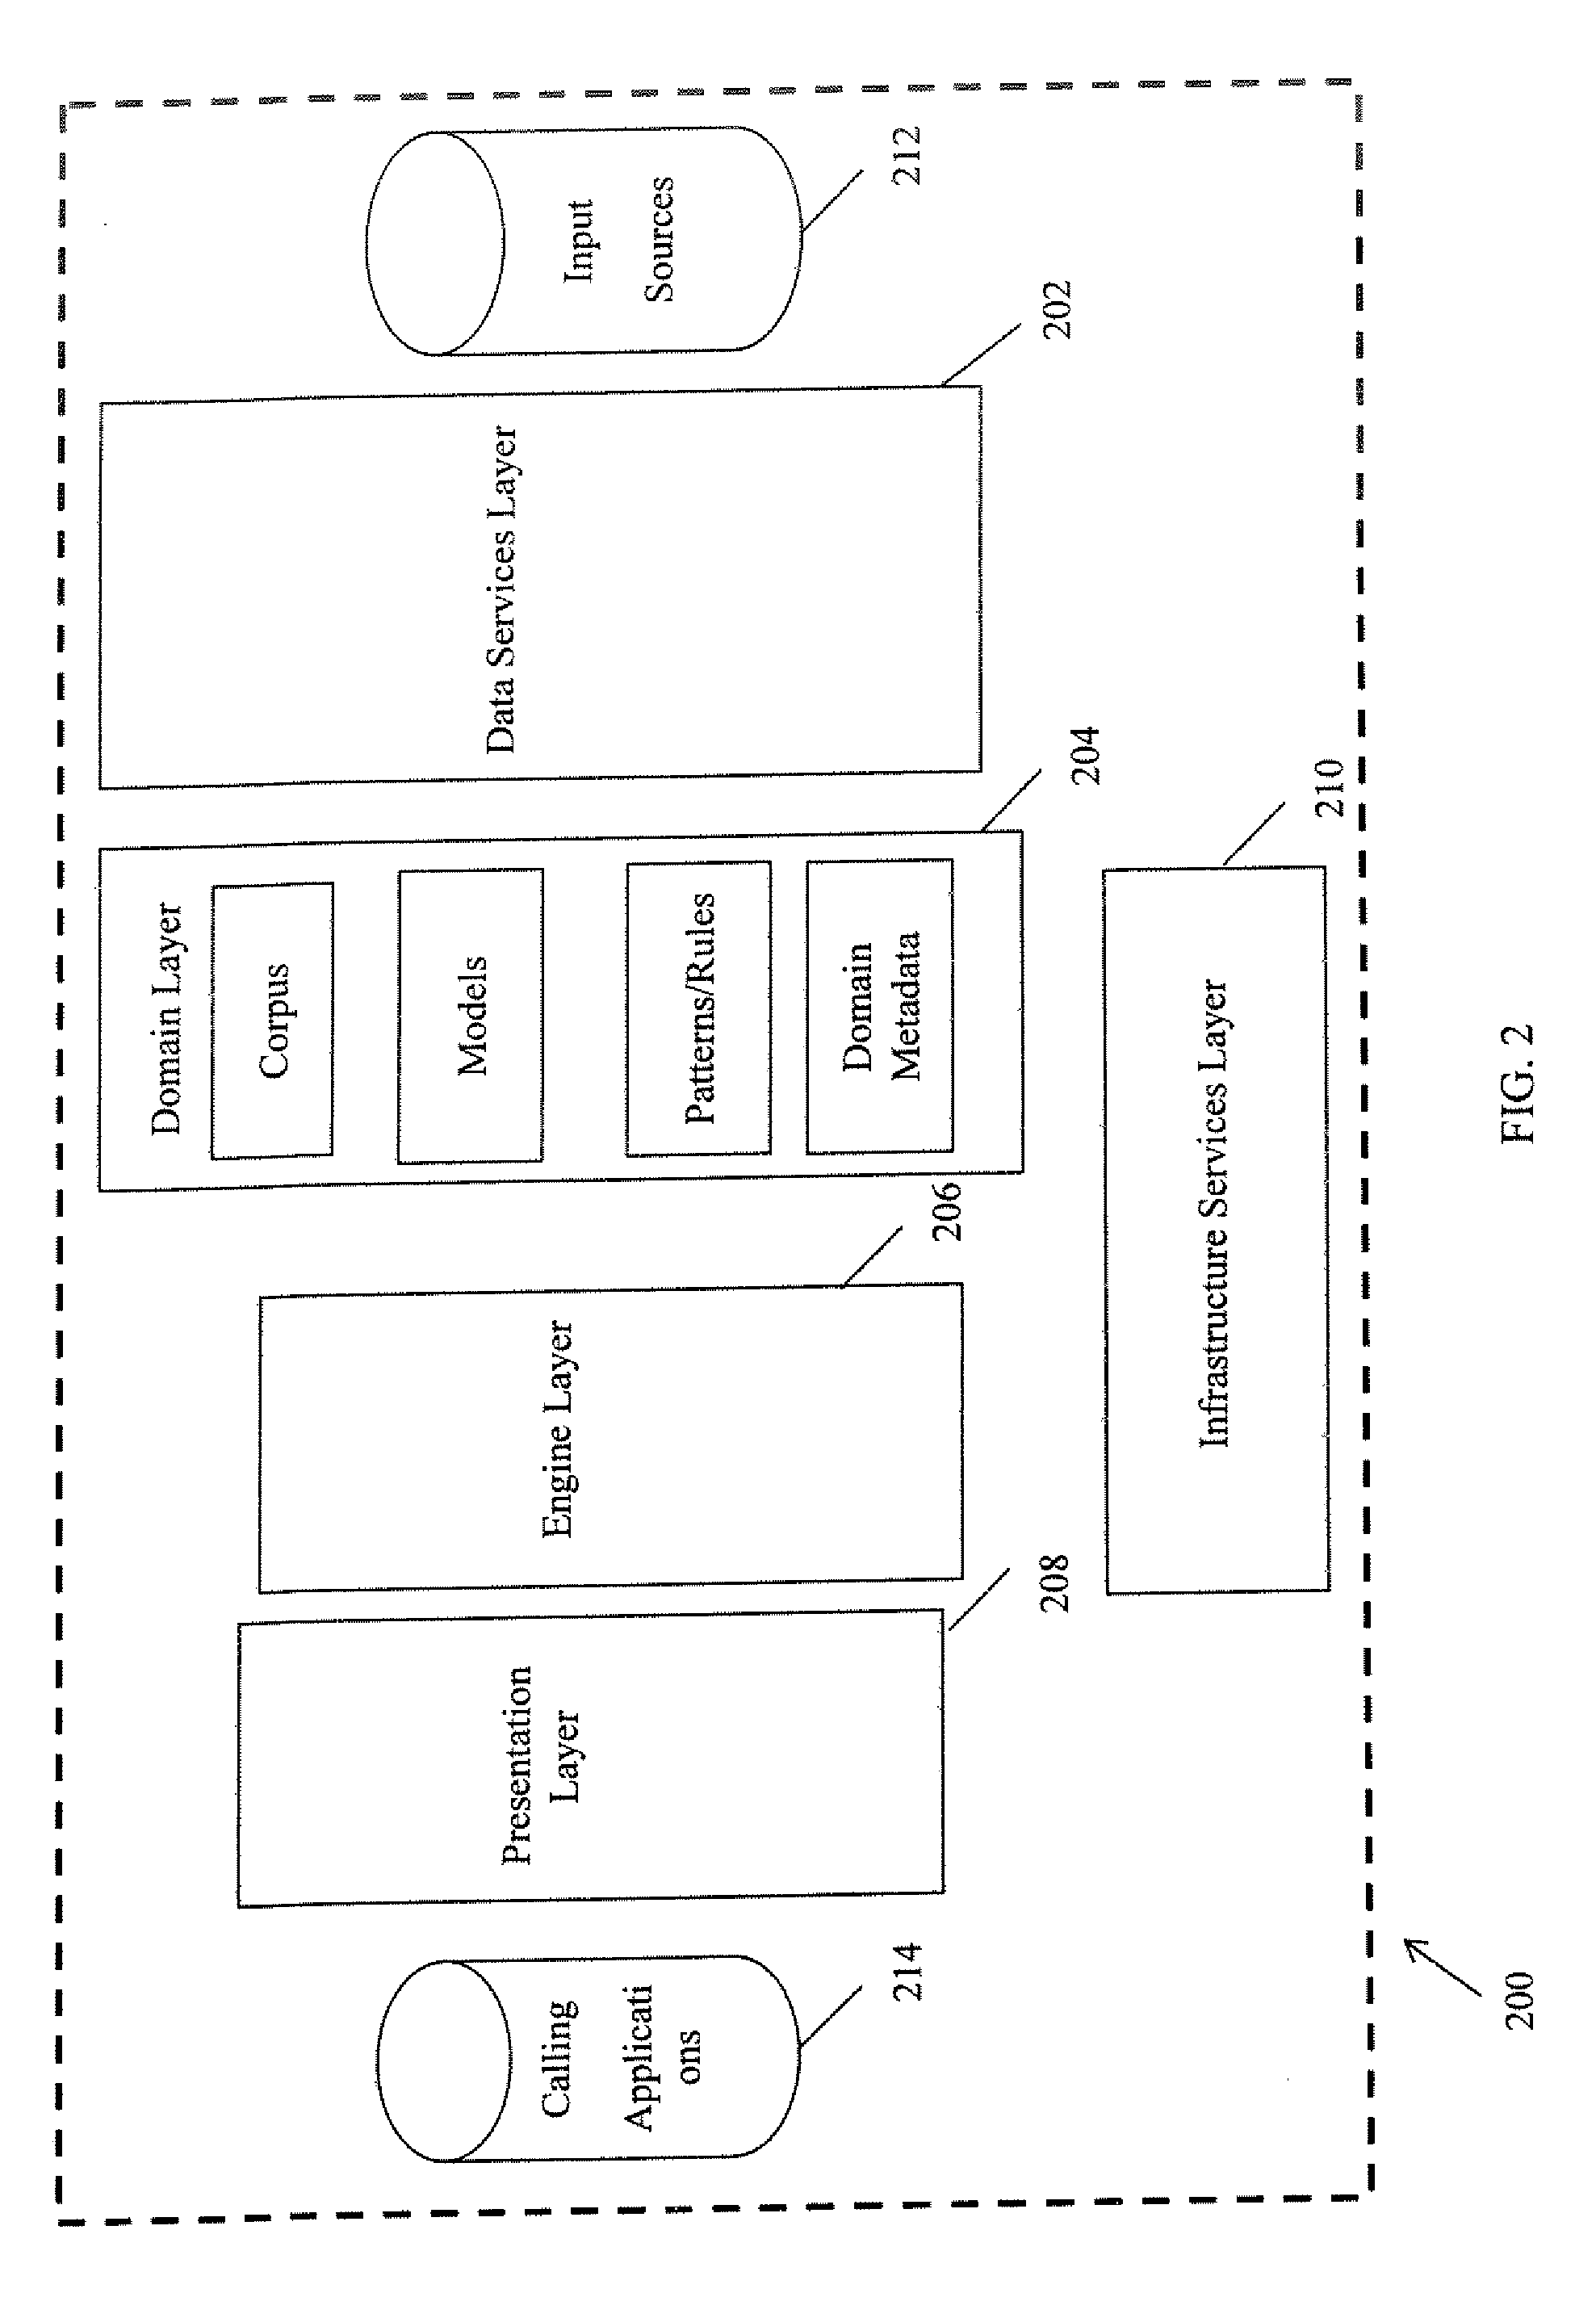 Method and system for semantic analysis of unstructured data